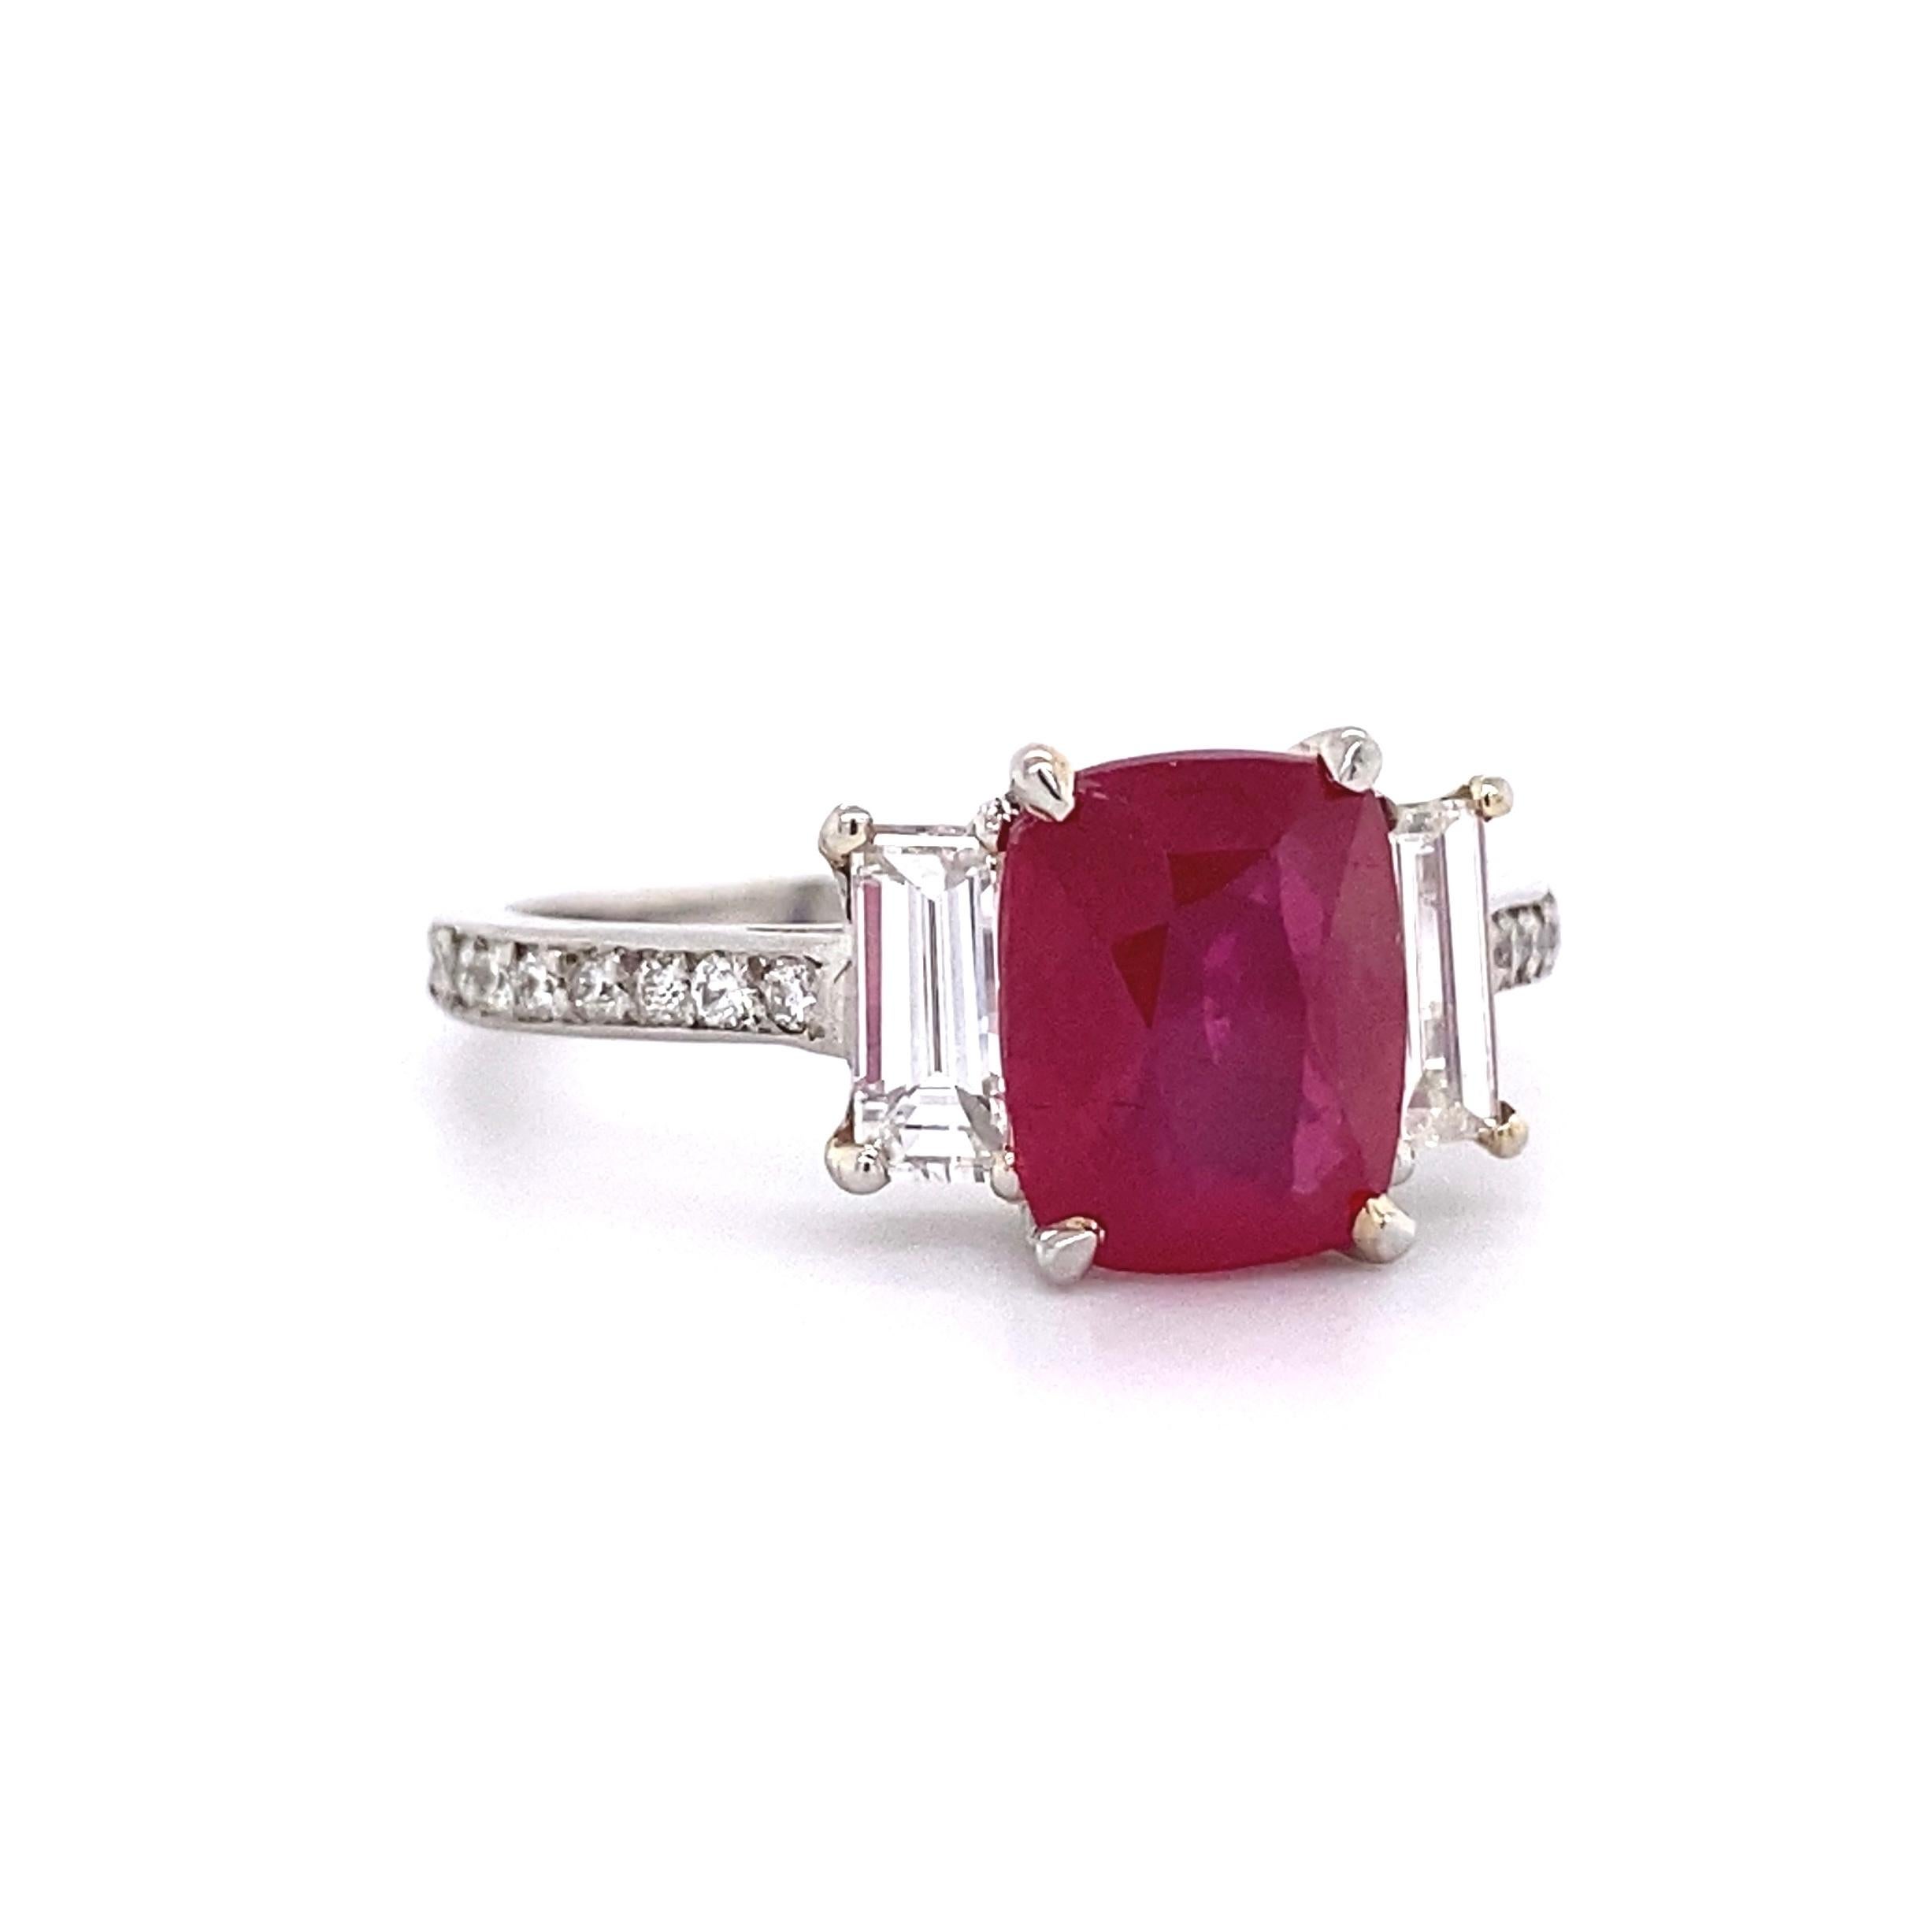 Simply Beautiful! Finely detailed Ruby and Diamond Platinum Ring, centering a Hand set securely nestled 2.57 Carat Cushion Cut Ruby with baguette Diamond on either side and round Diamonds all the way down the shank. Approx. 0.63 total carat weight.